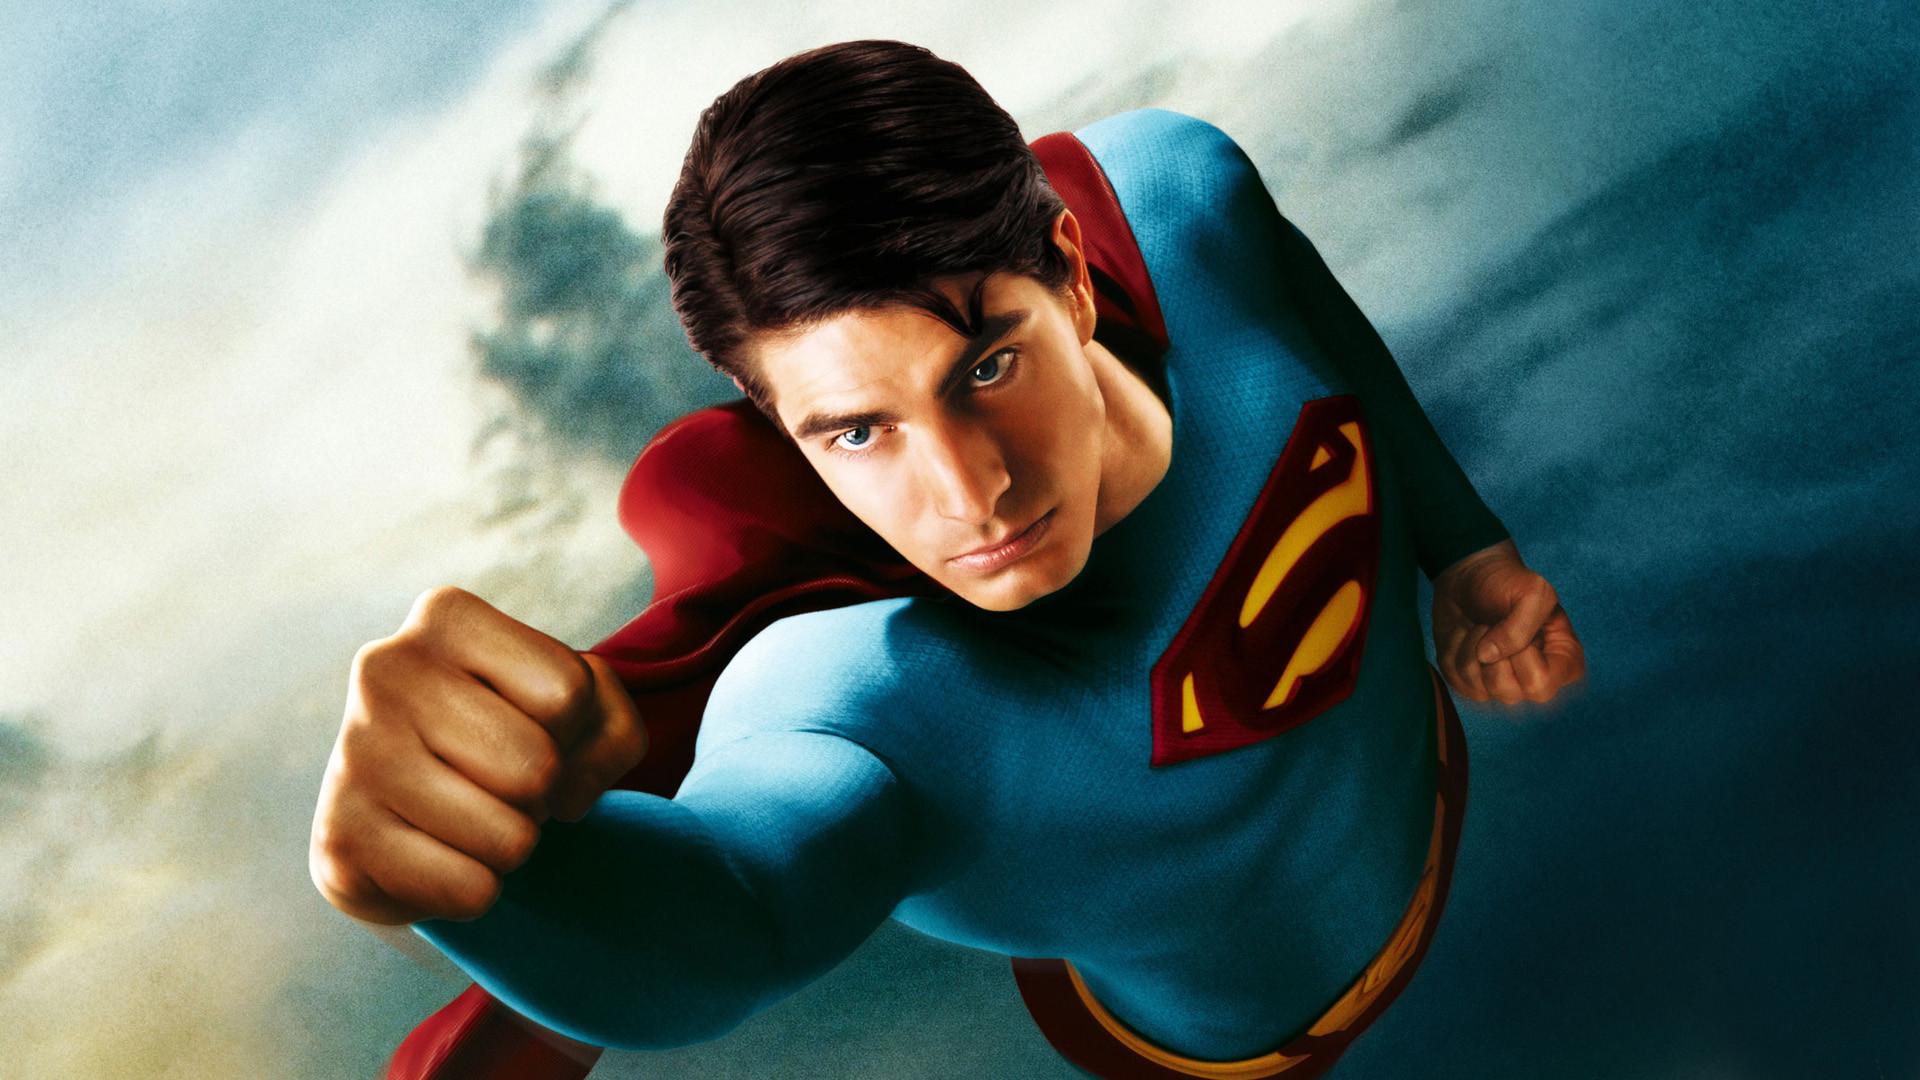 It’s been 10 years since ‘Superman Returns’ — where is the cast now?